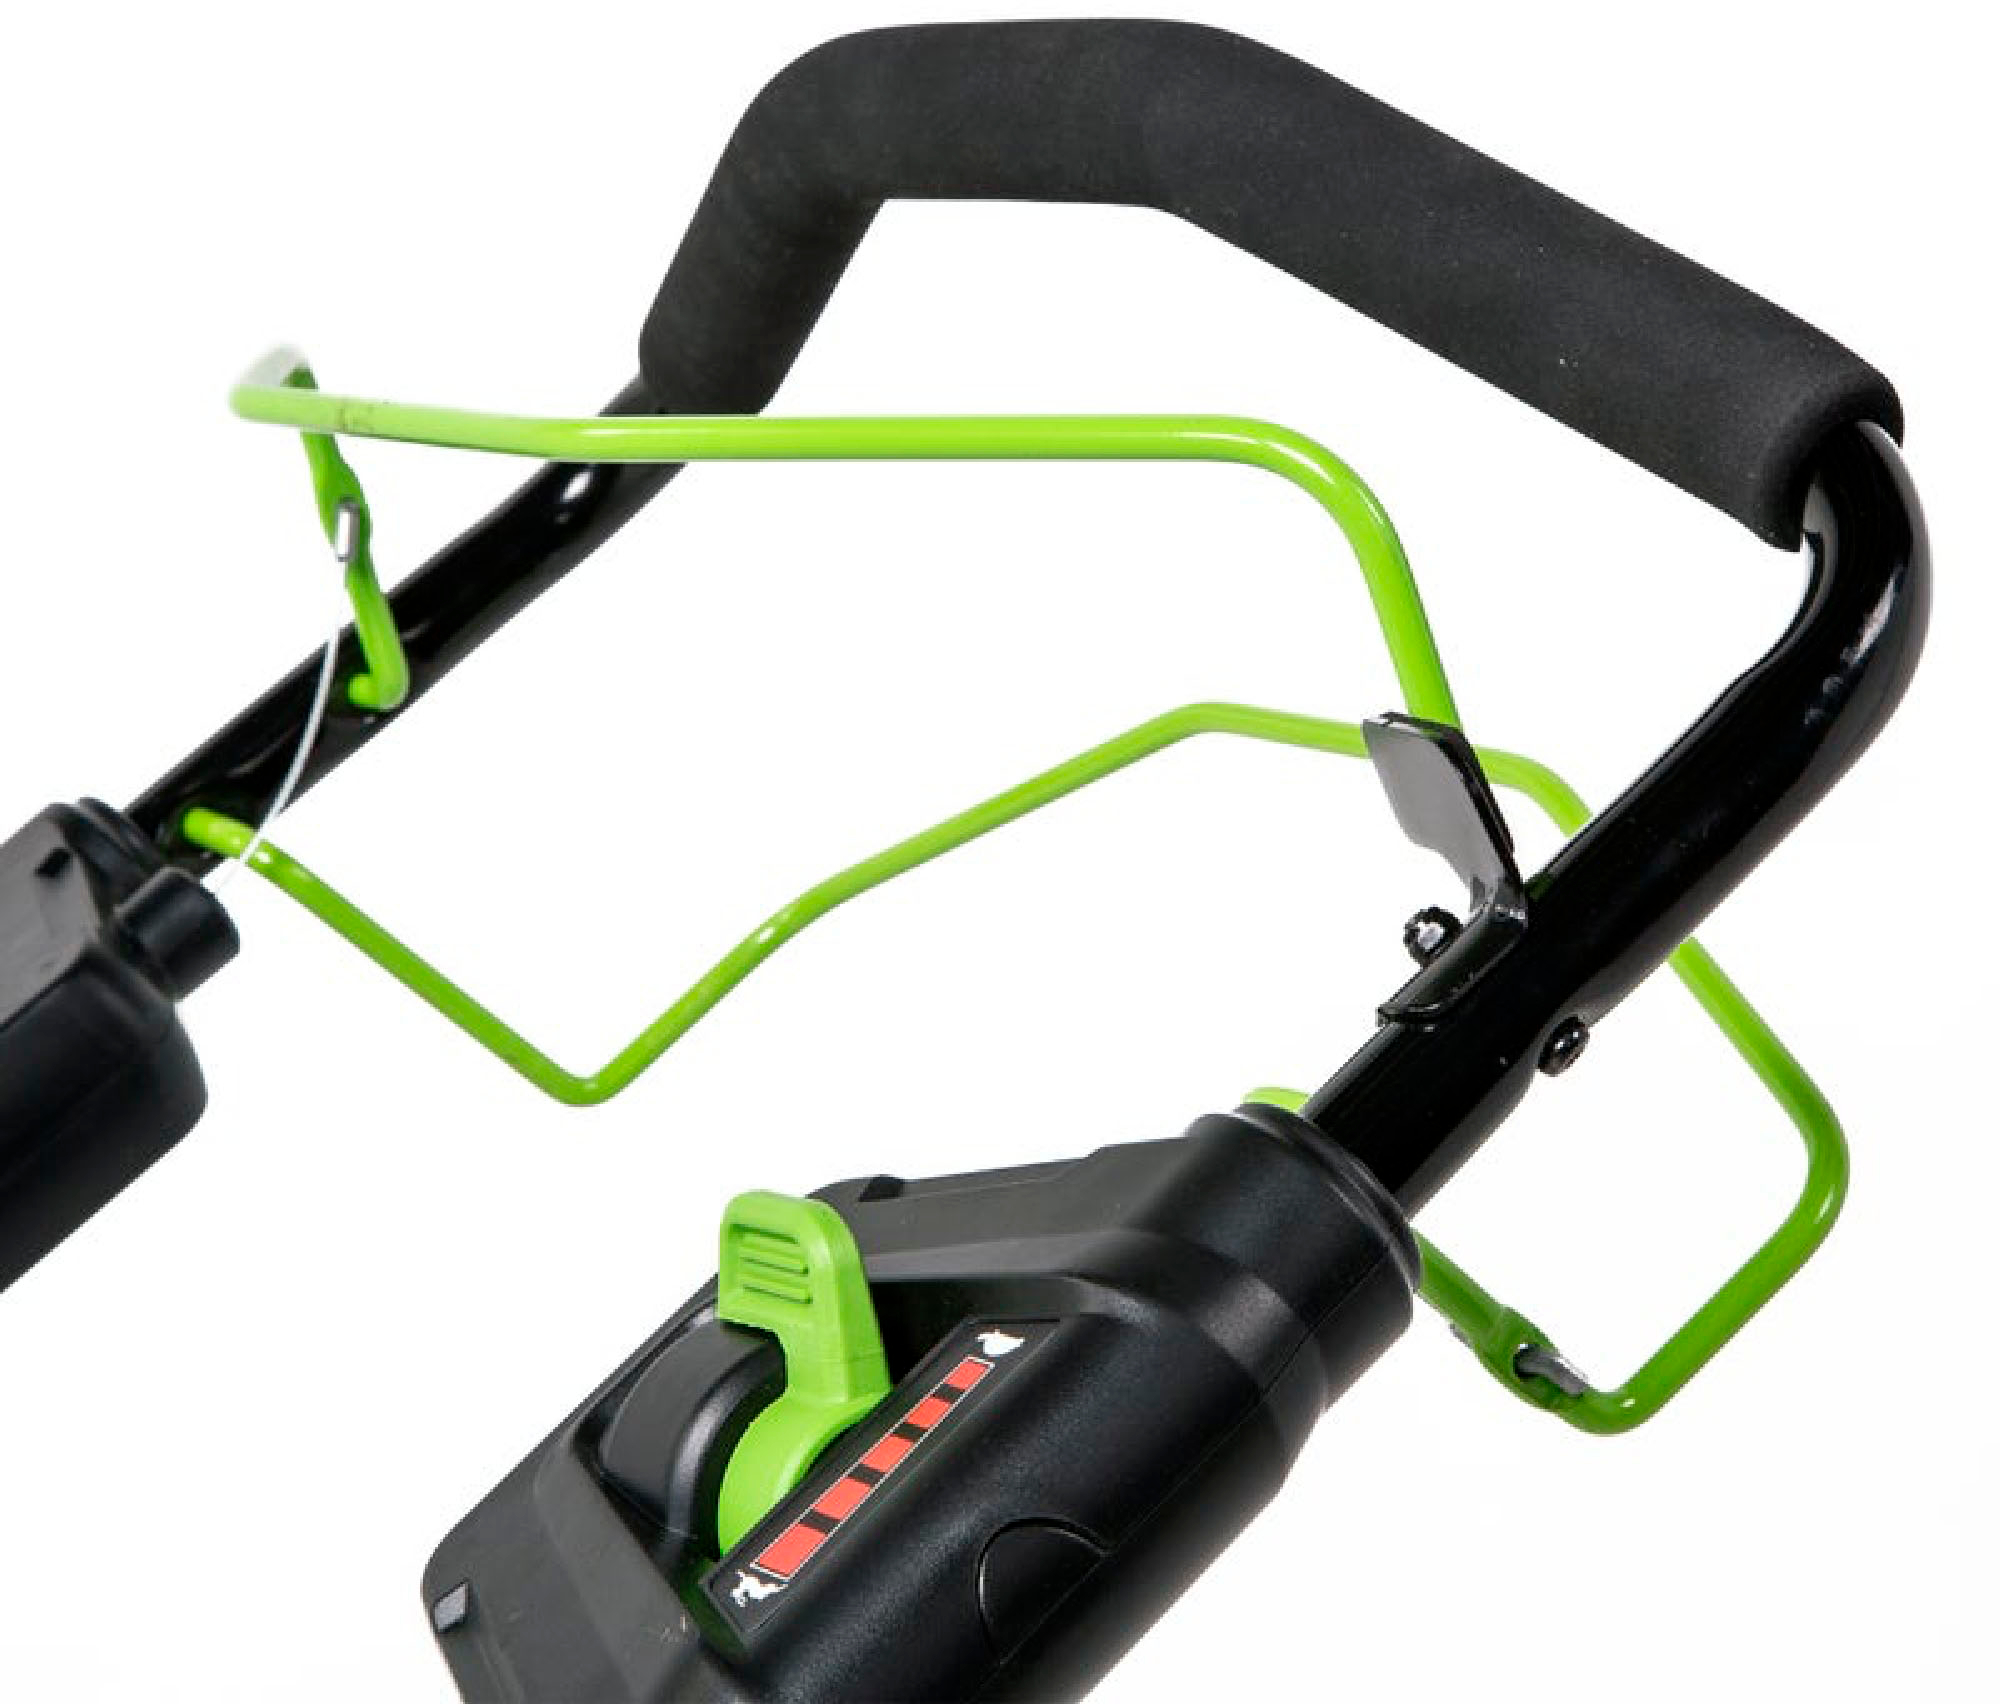 Angle View: Greenworks - 80 Volt 21-Inch Self-Propelled Lawn Mower (1 x 2.0Ah and 1 x 4.0Ah battery and 1 x Charger) - Green